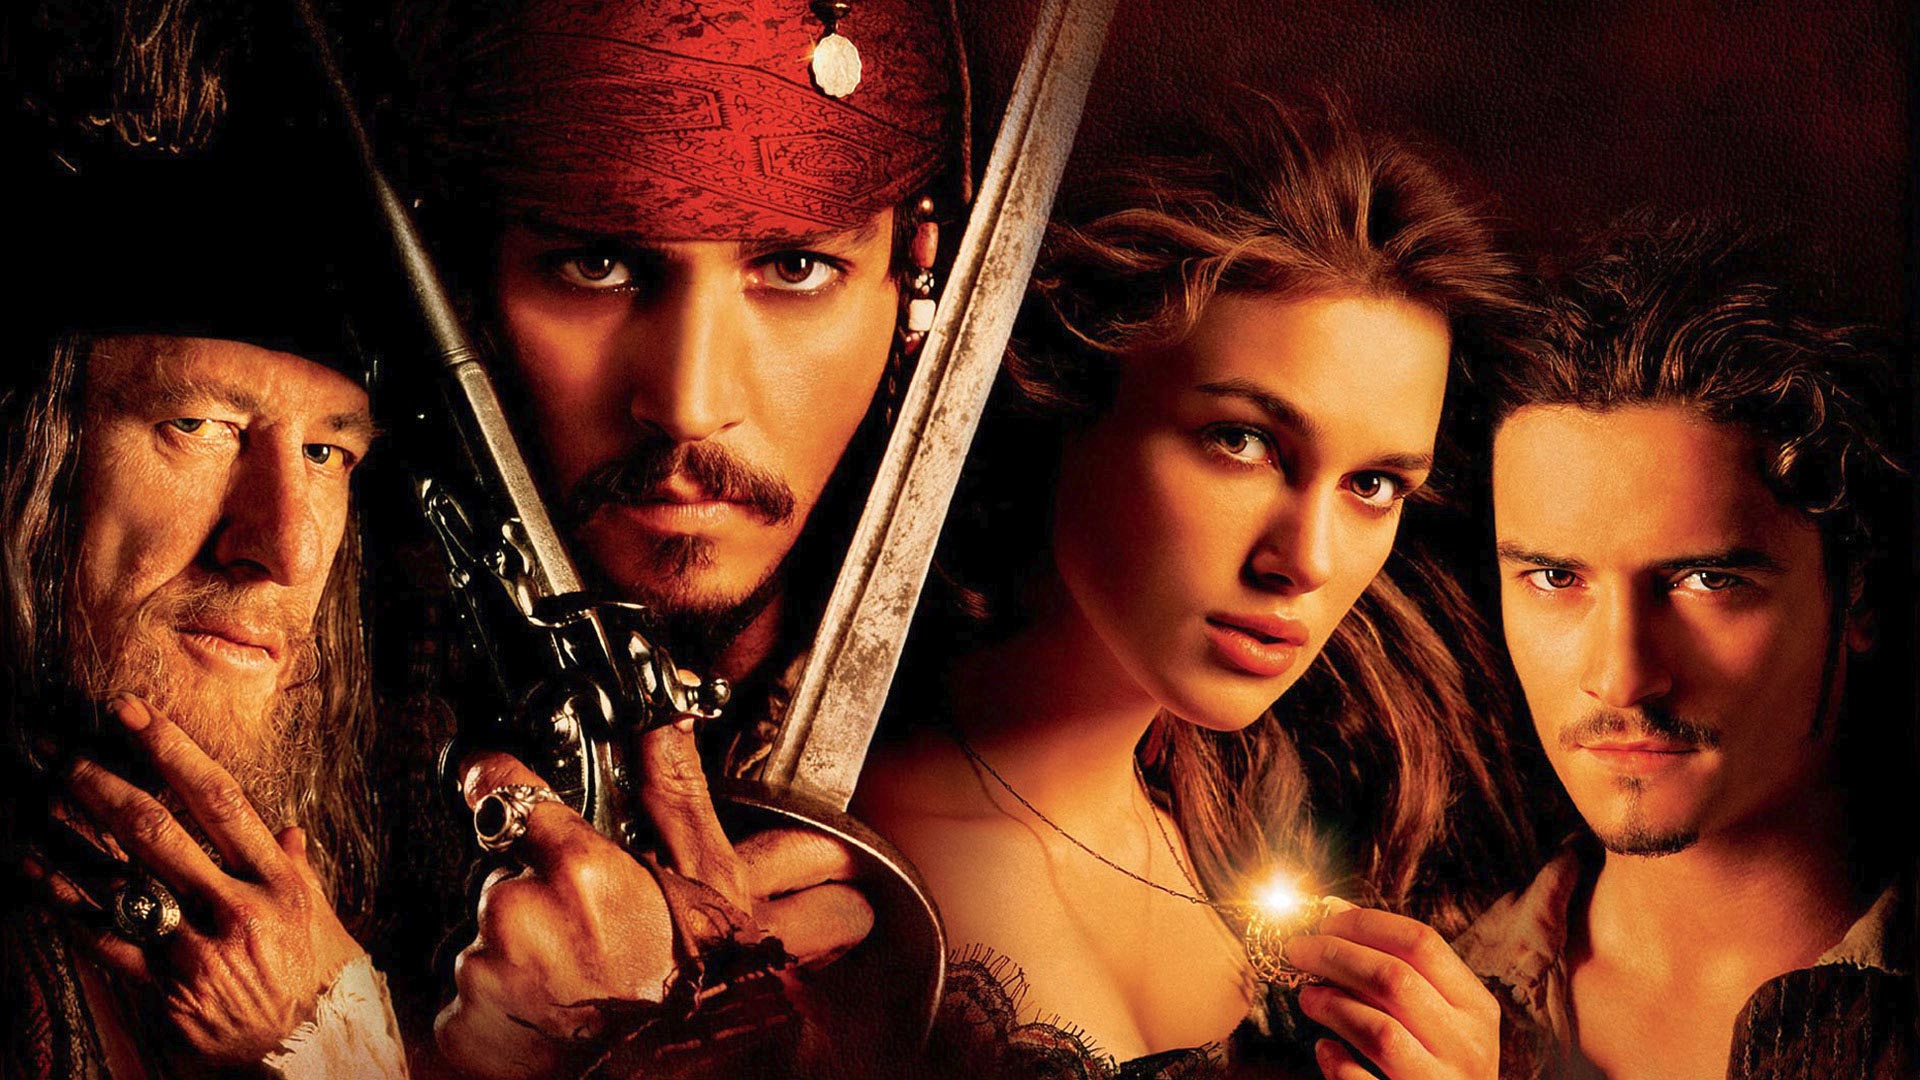 Amazing Pirates Of The Caribbean: The Curse Of The Black Pearl Pictures & Backgrounds